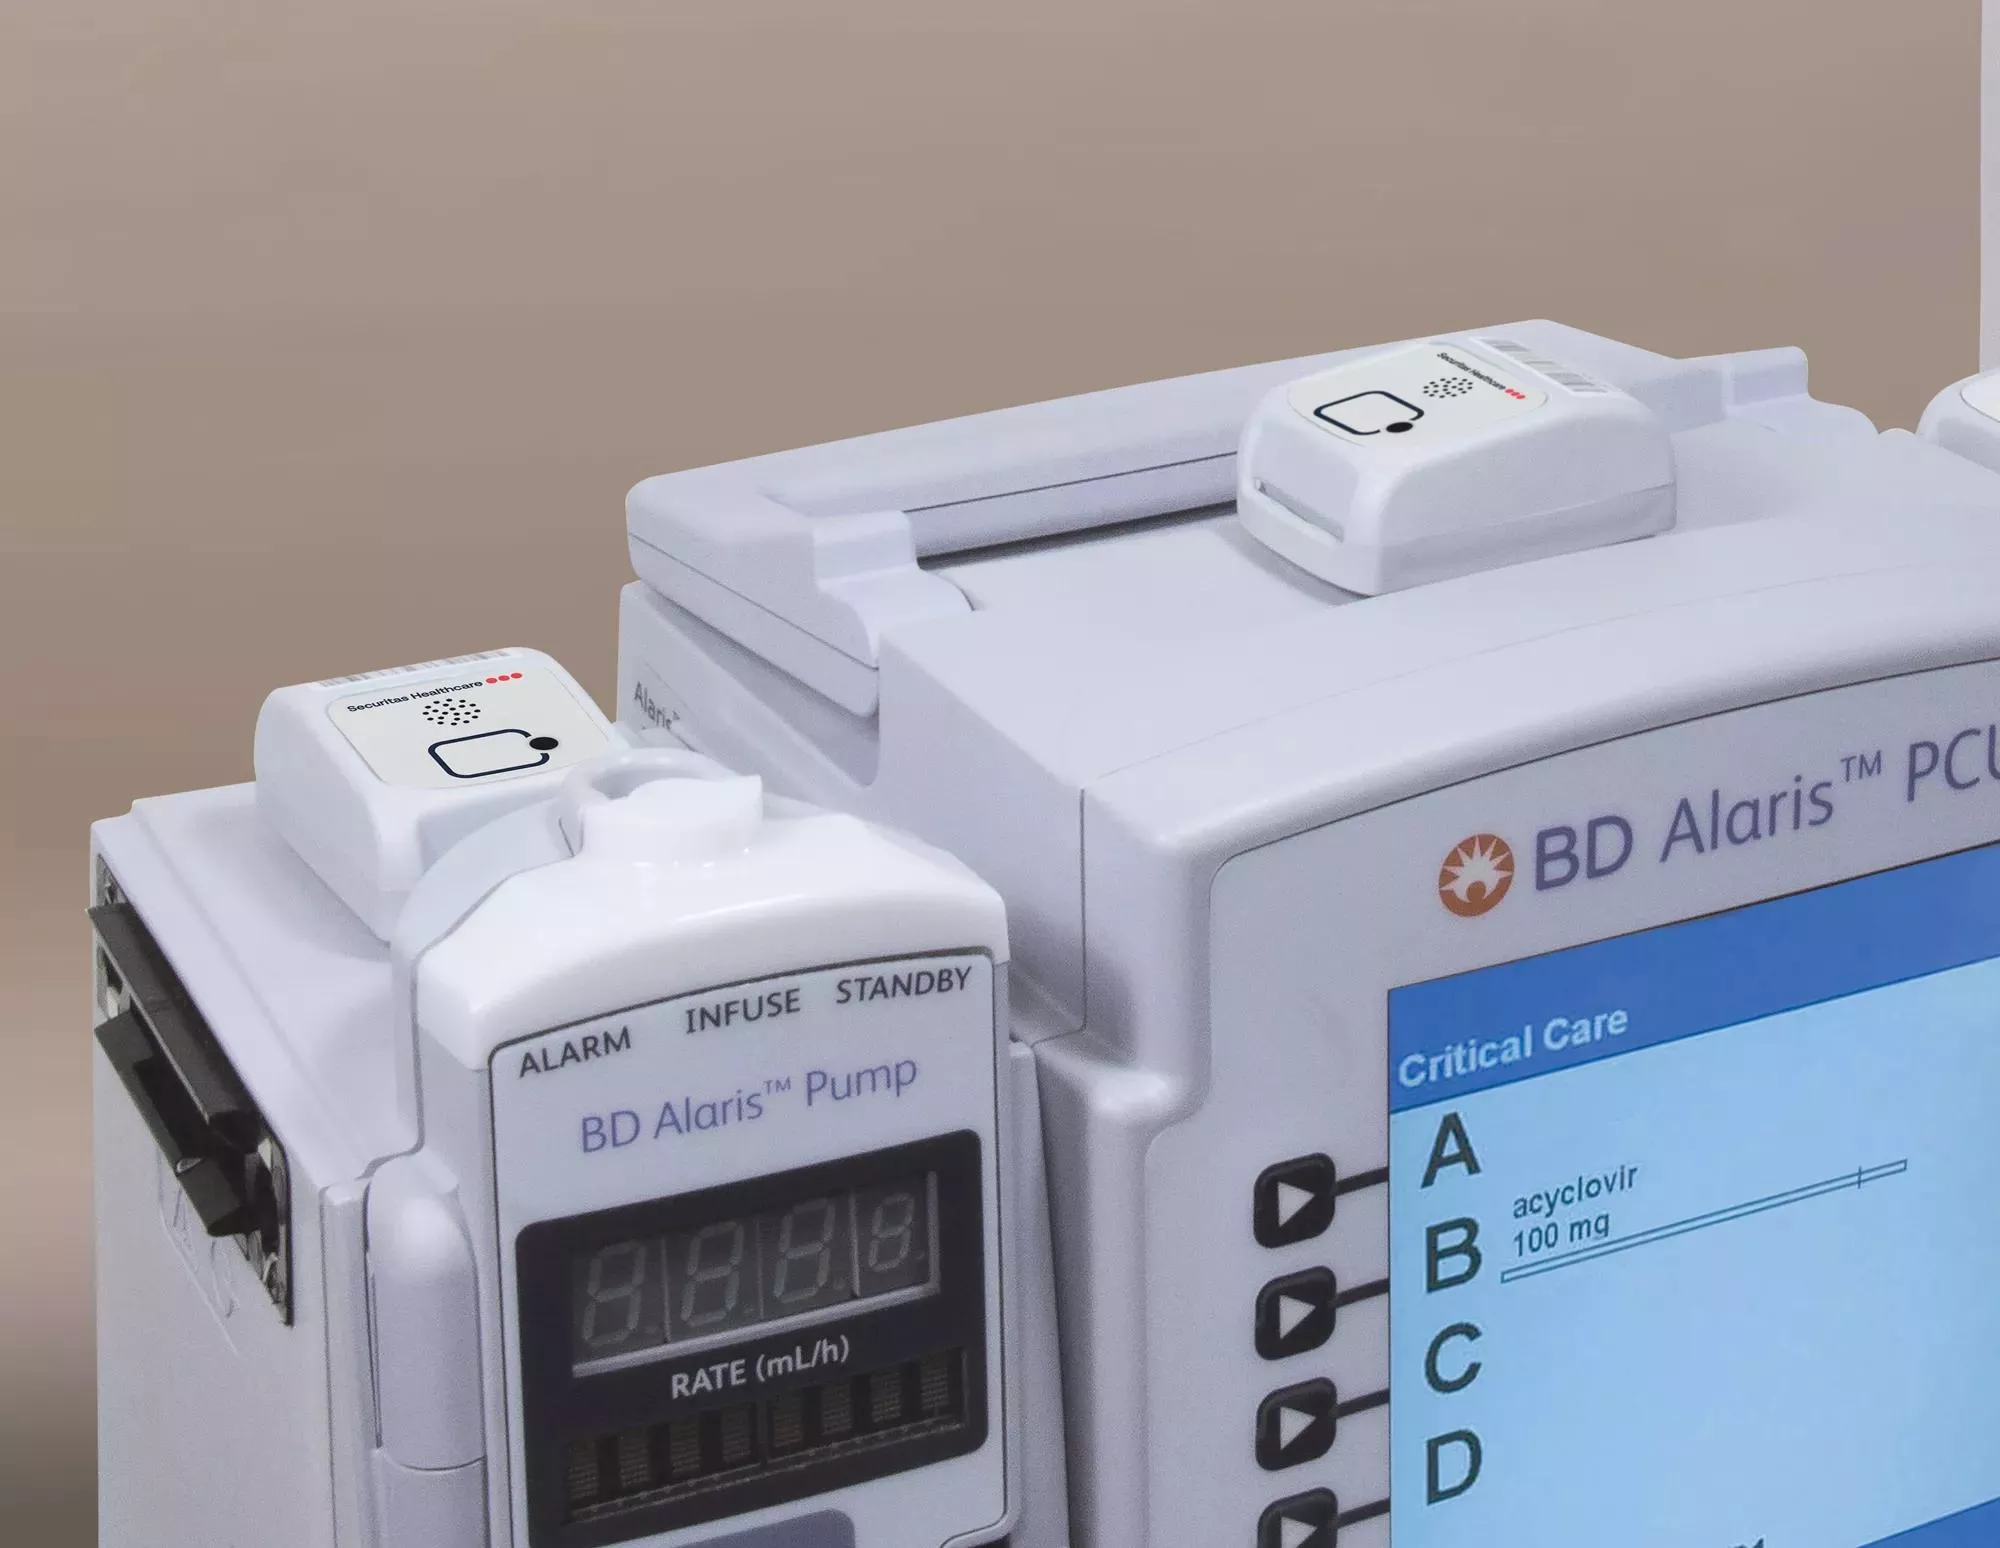 Securitas Healthcare's Asset tracking attached to a BD Alaris infusion pump